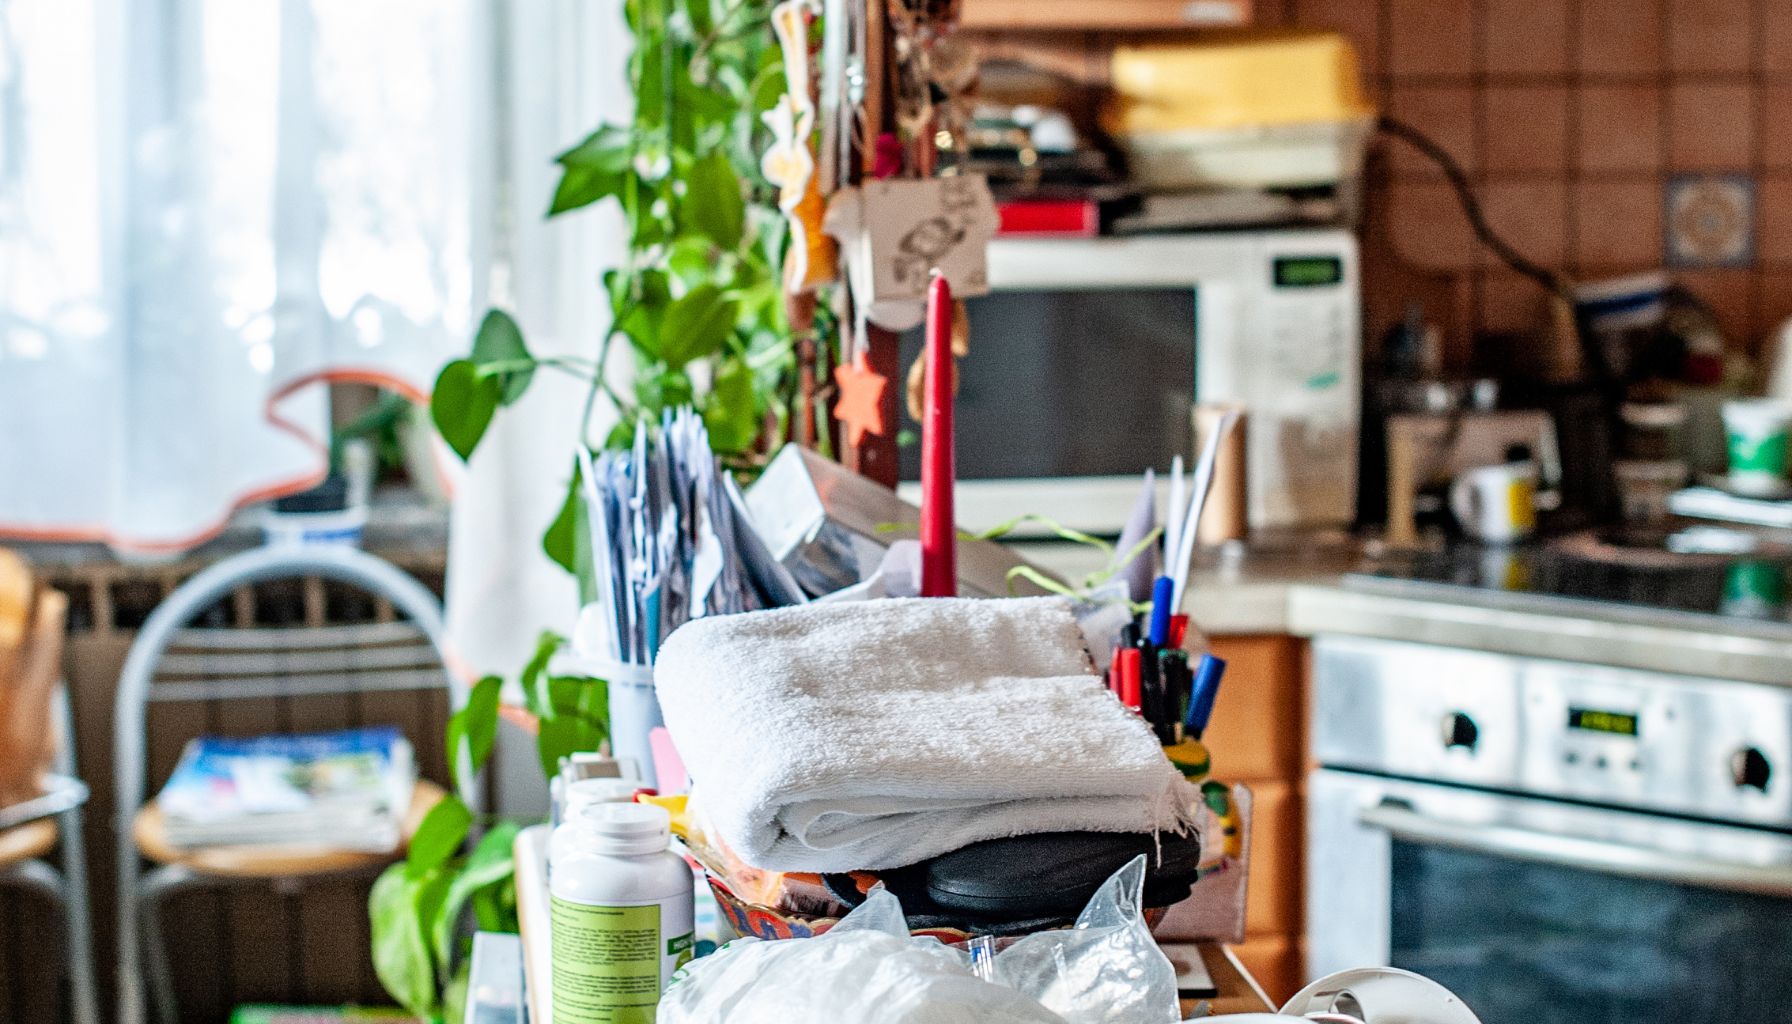 A cluttered kitchen featuring a pile of towels, plants, various kitchen appliances including a microwave and an oven, and other miscellaneous items scattered around the countertop, some of which hint at the need for mold restoration. -PureOneServices